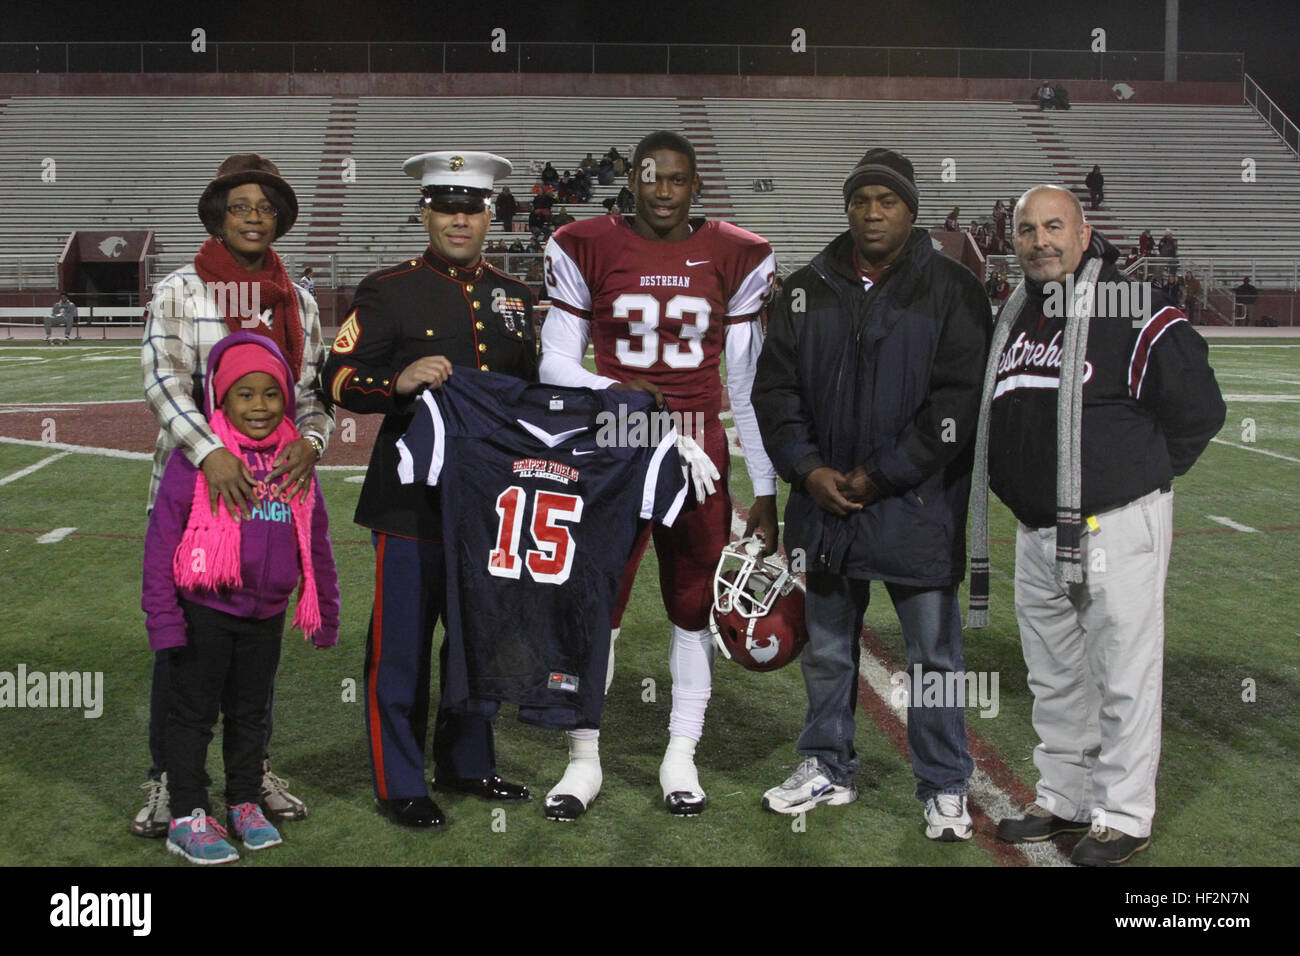 Kirk Merritt, an athlete from the Destrehan High School football team, is presented a jersey for being selected to play in the Semper Fidelis All-American Bowl on Jan. 4, 2015. The jersey was presented by Marine Corps Recruiter Staff Sgt. Carlos Pineda with the attendance of Kirk’s parents and his coach during the Destrehan vs Pineville football game on Nov. 14. Kirk Merritt selected for SFAAB 141114-M-YE163-001 Stock Photo